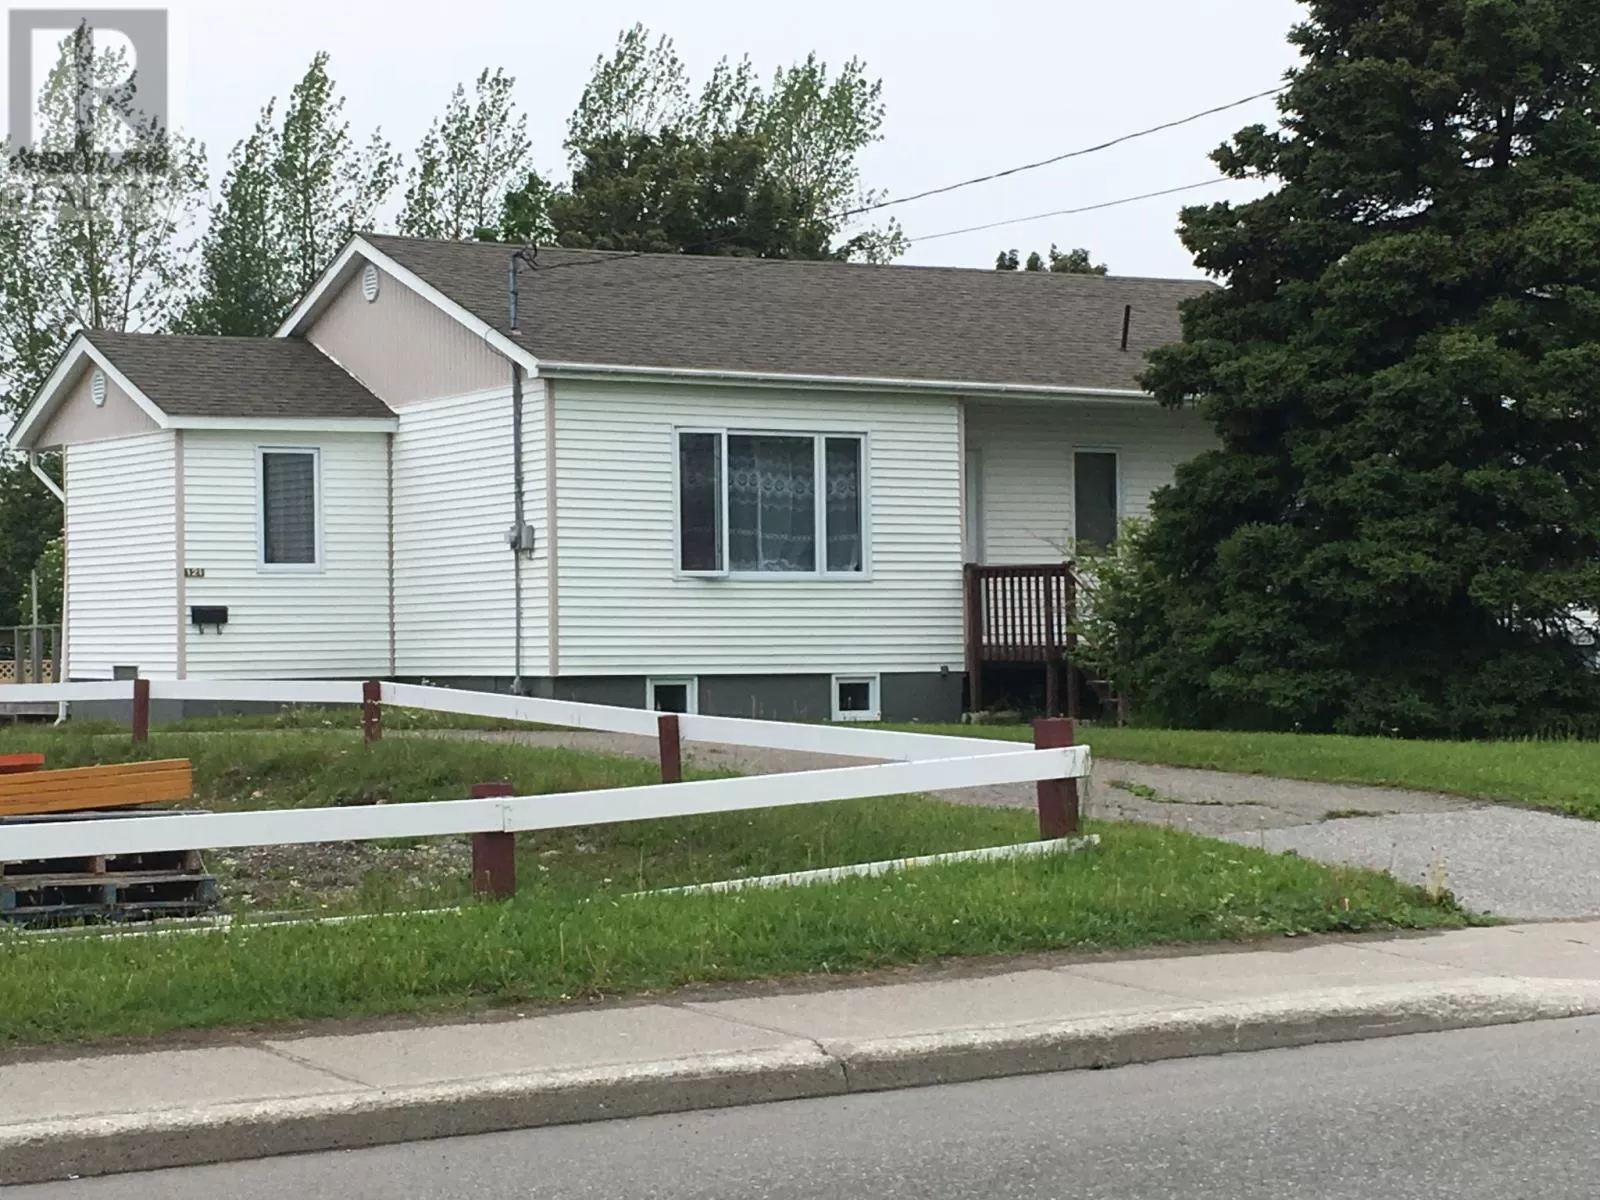 House for rent: 121 Queen Street, STEPHENVILLE, Newfoundland & Labrador A2N 2N6